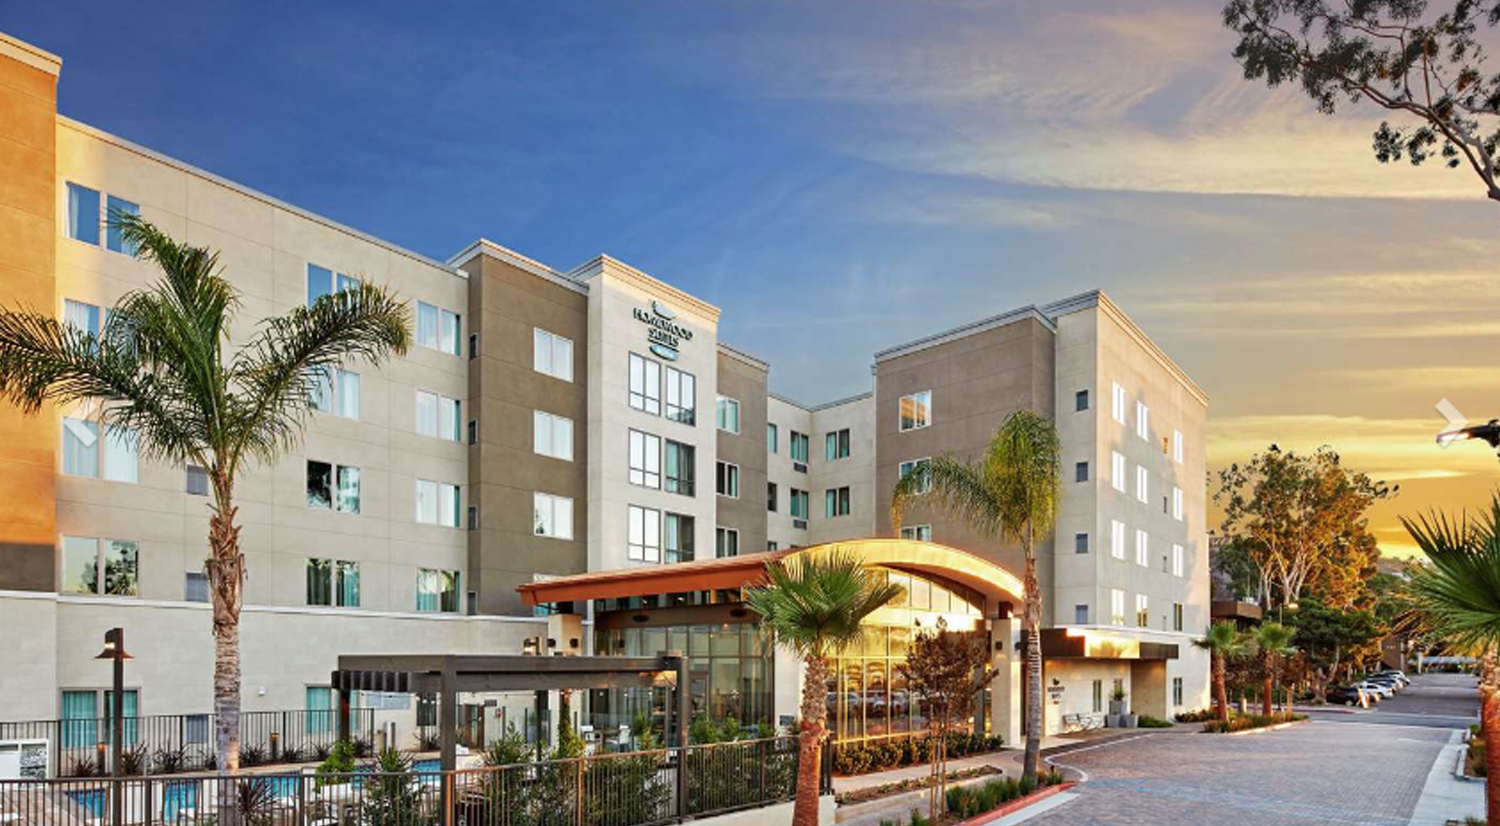 Homewood Suites by Hilton San Diego Mission Valley Hotel RecruitParents